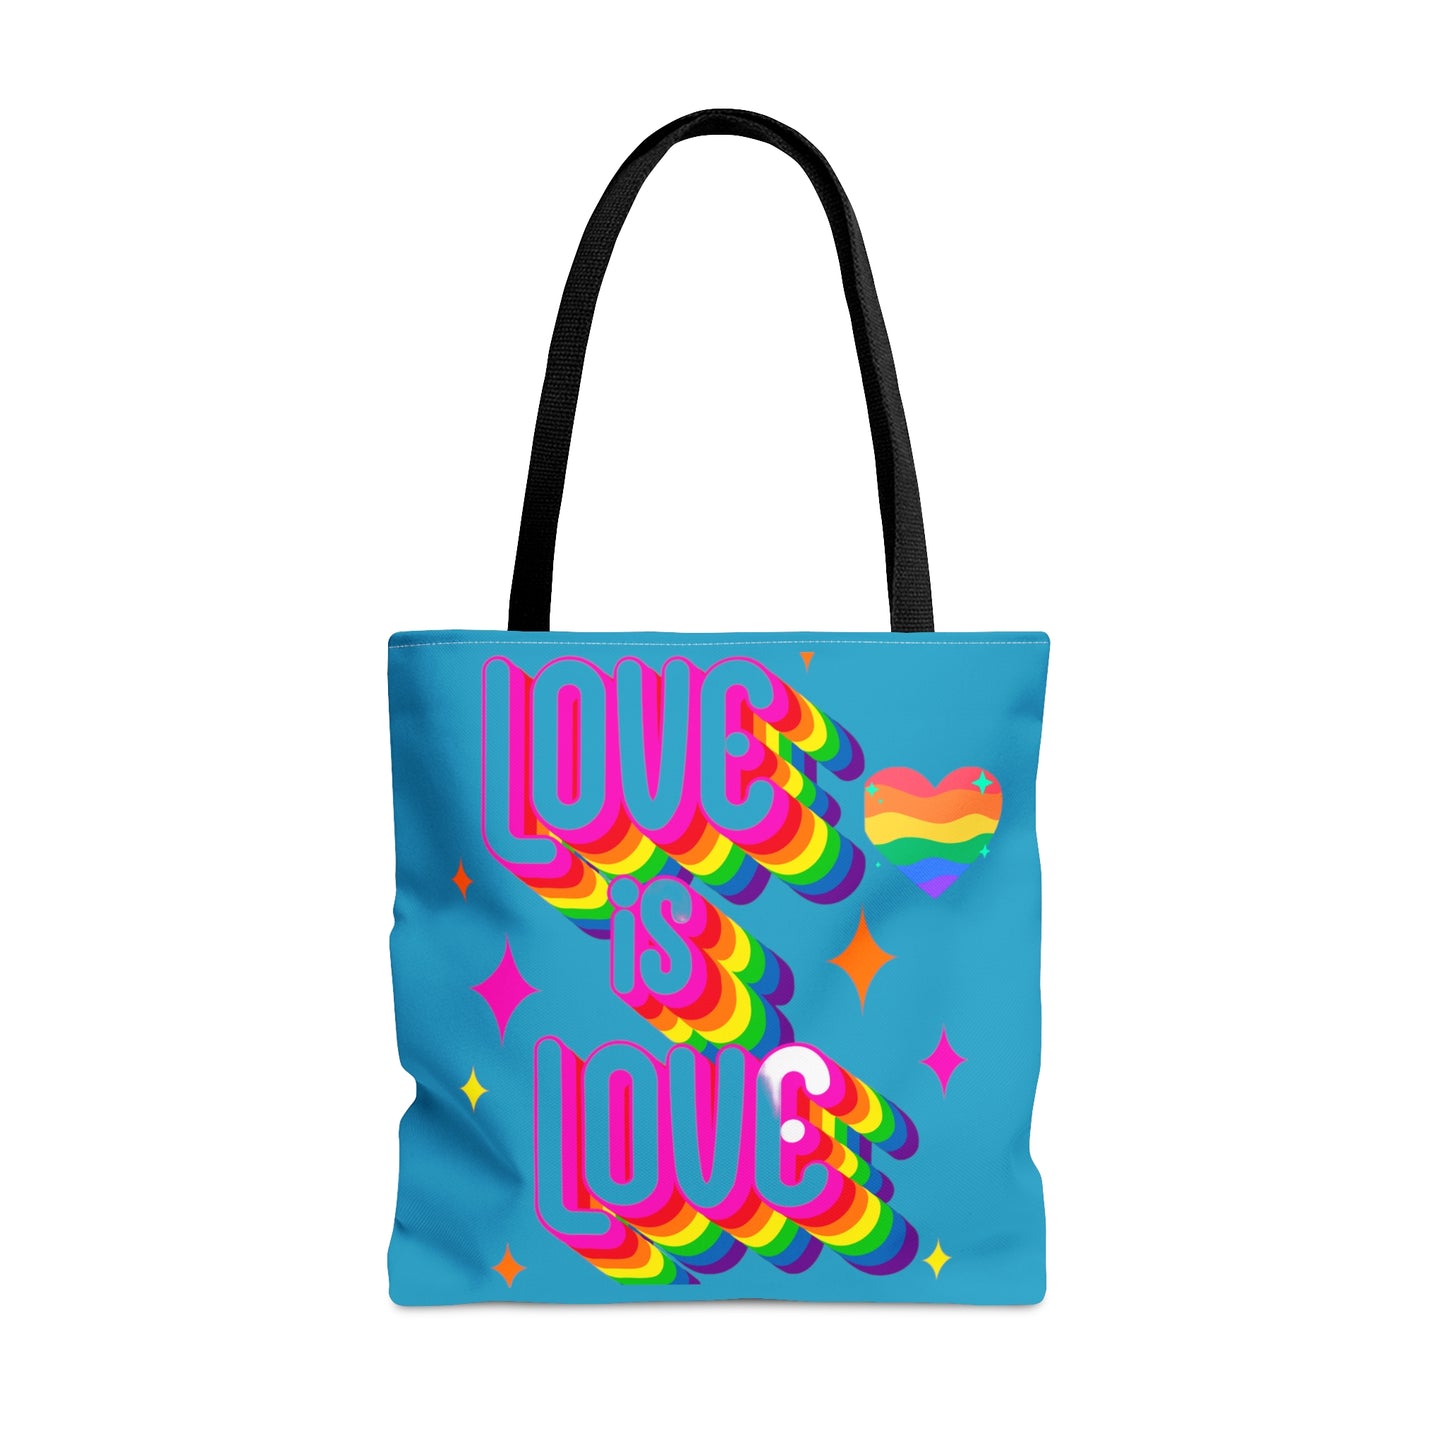 LOVE IS LOVE, full stop. Celebrate it with this colorful Tote Bag in 3 sizes to meet your needs.